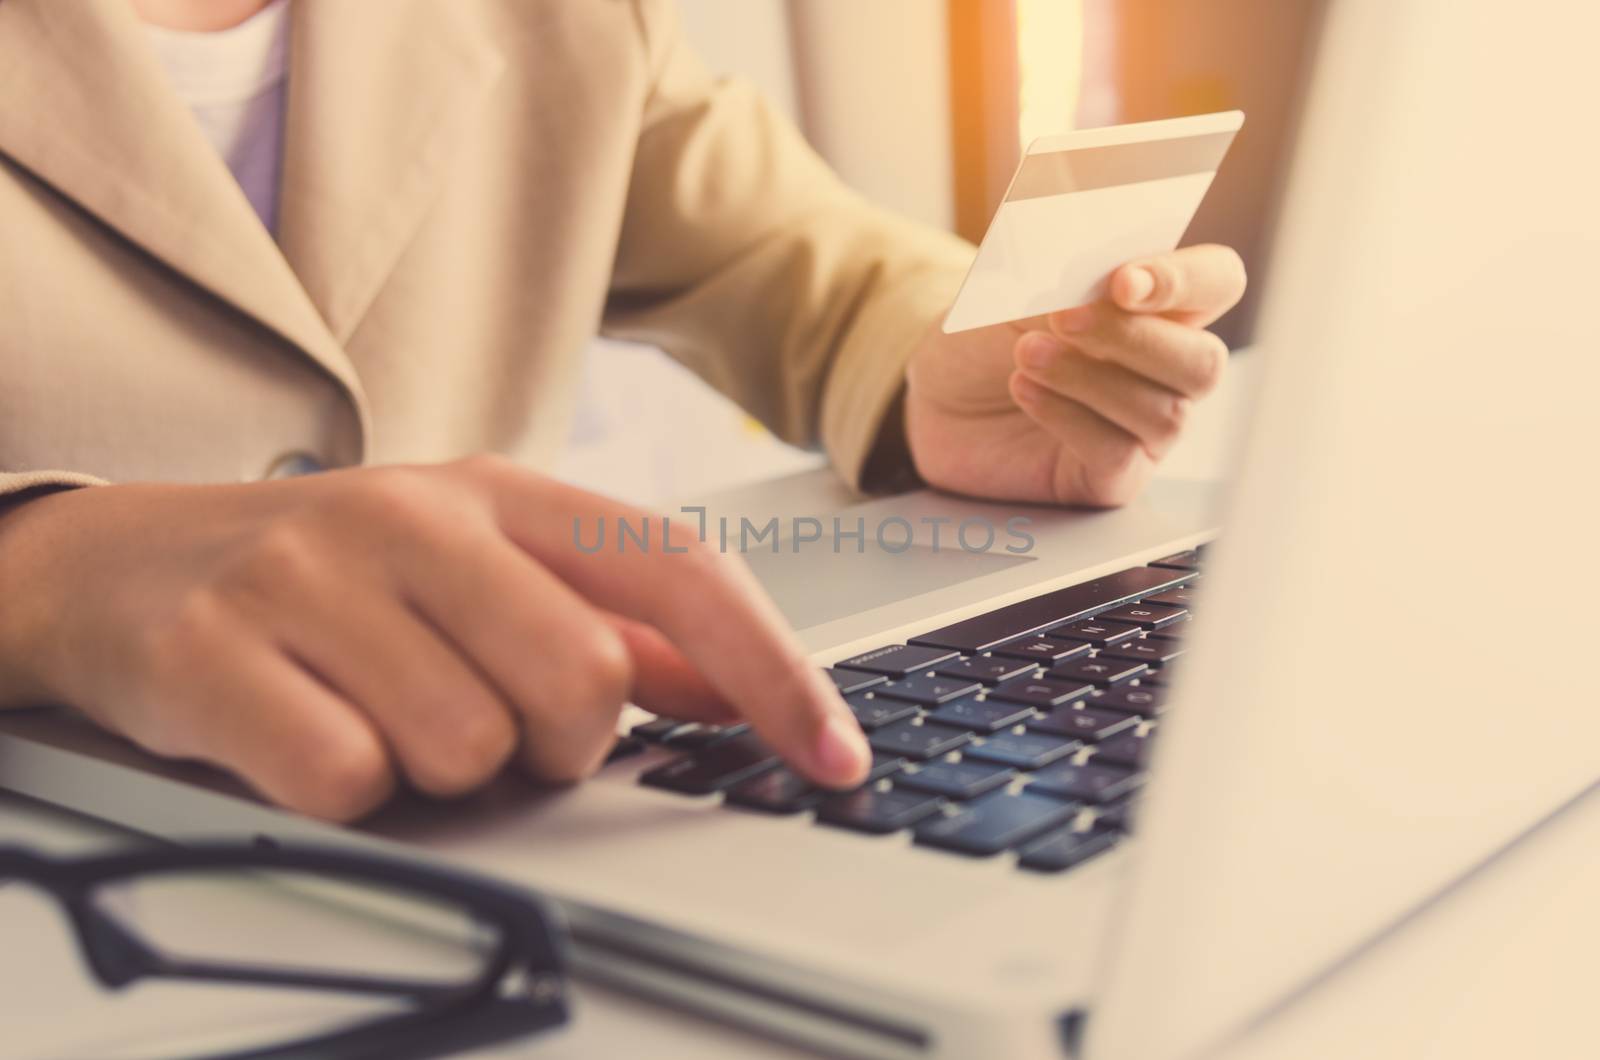 Credit Card Holders and Used Laptops Ordering and Payment - Conc by photobyphotoboy